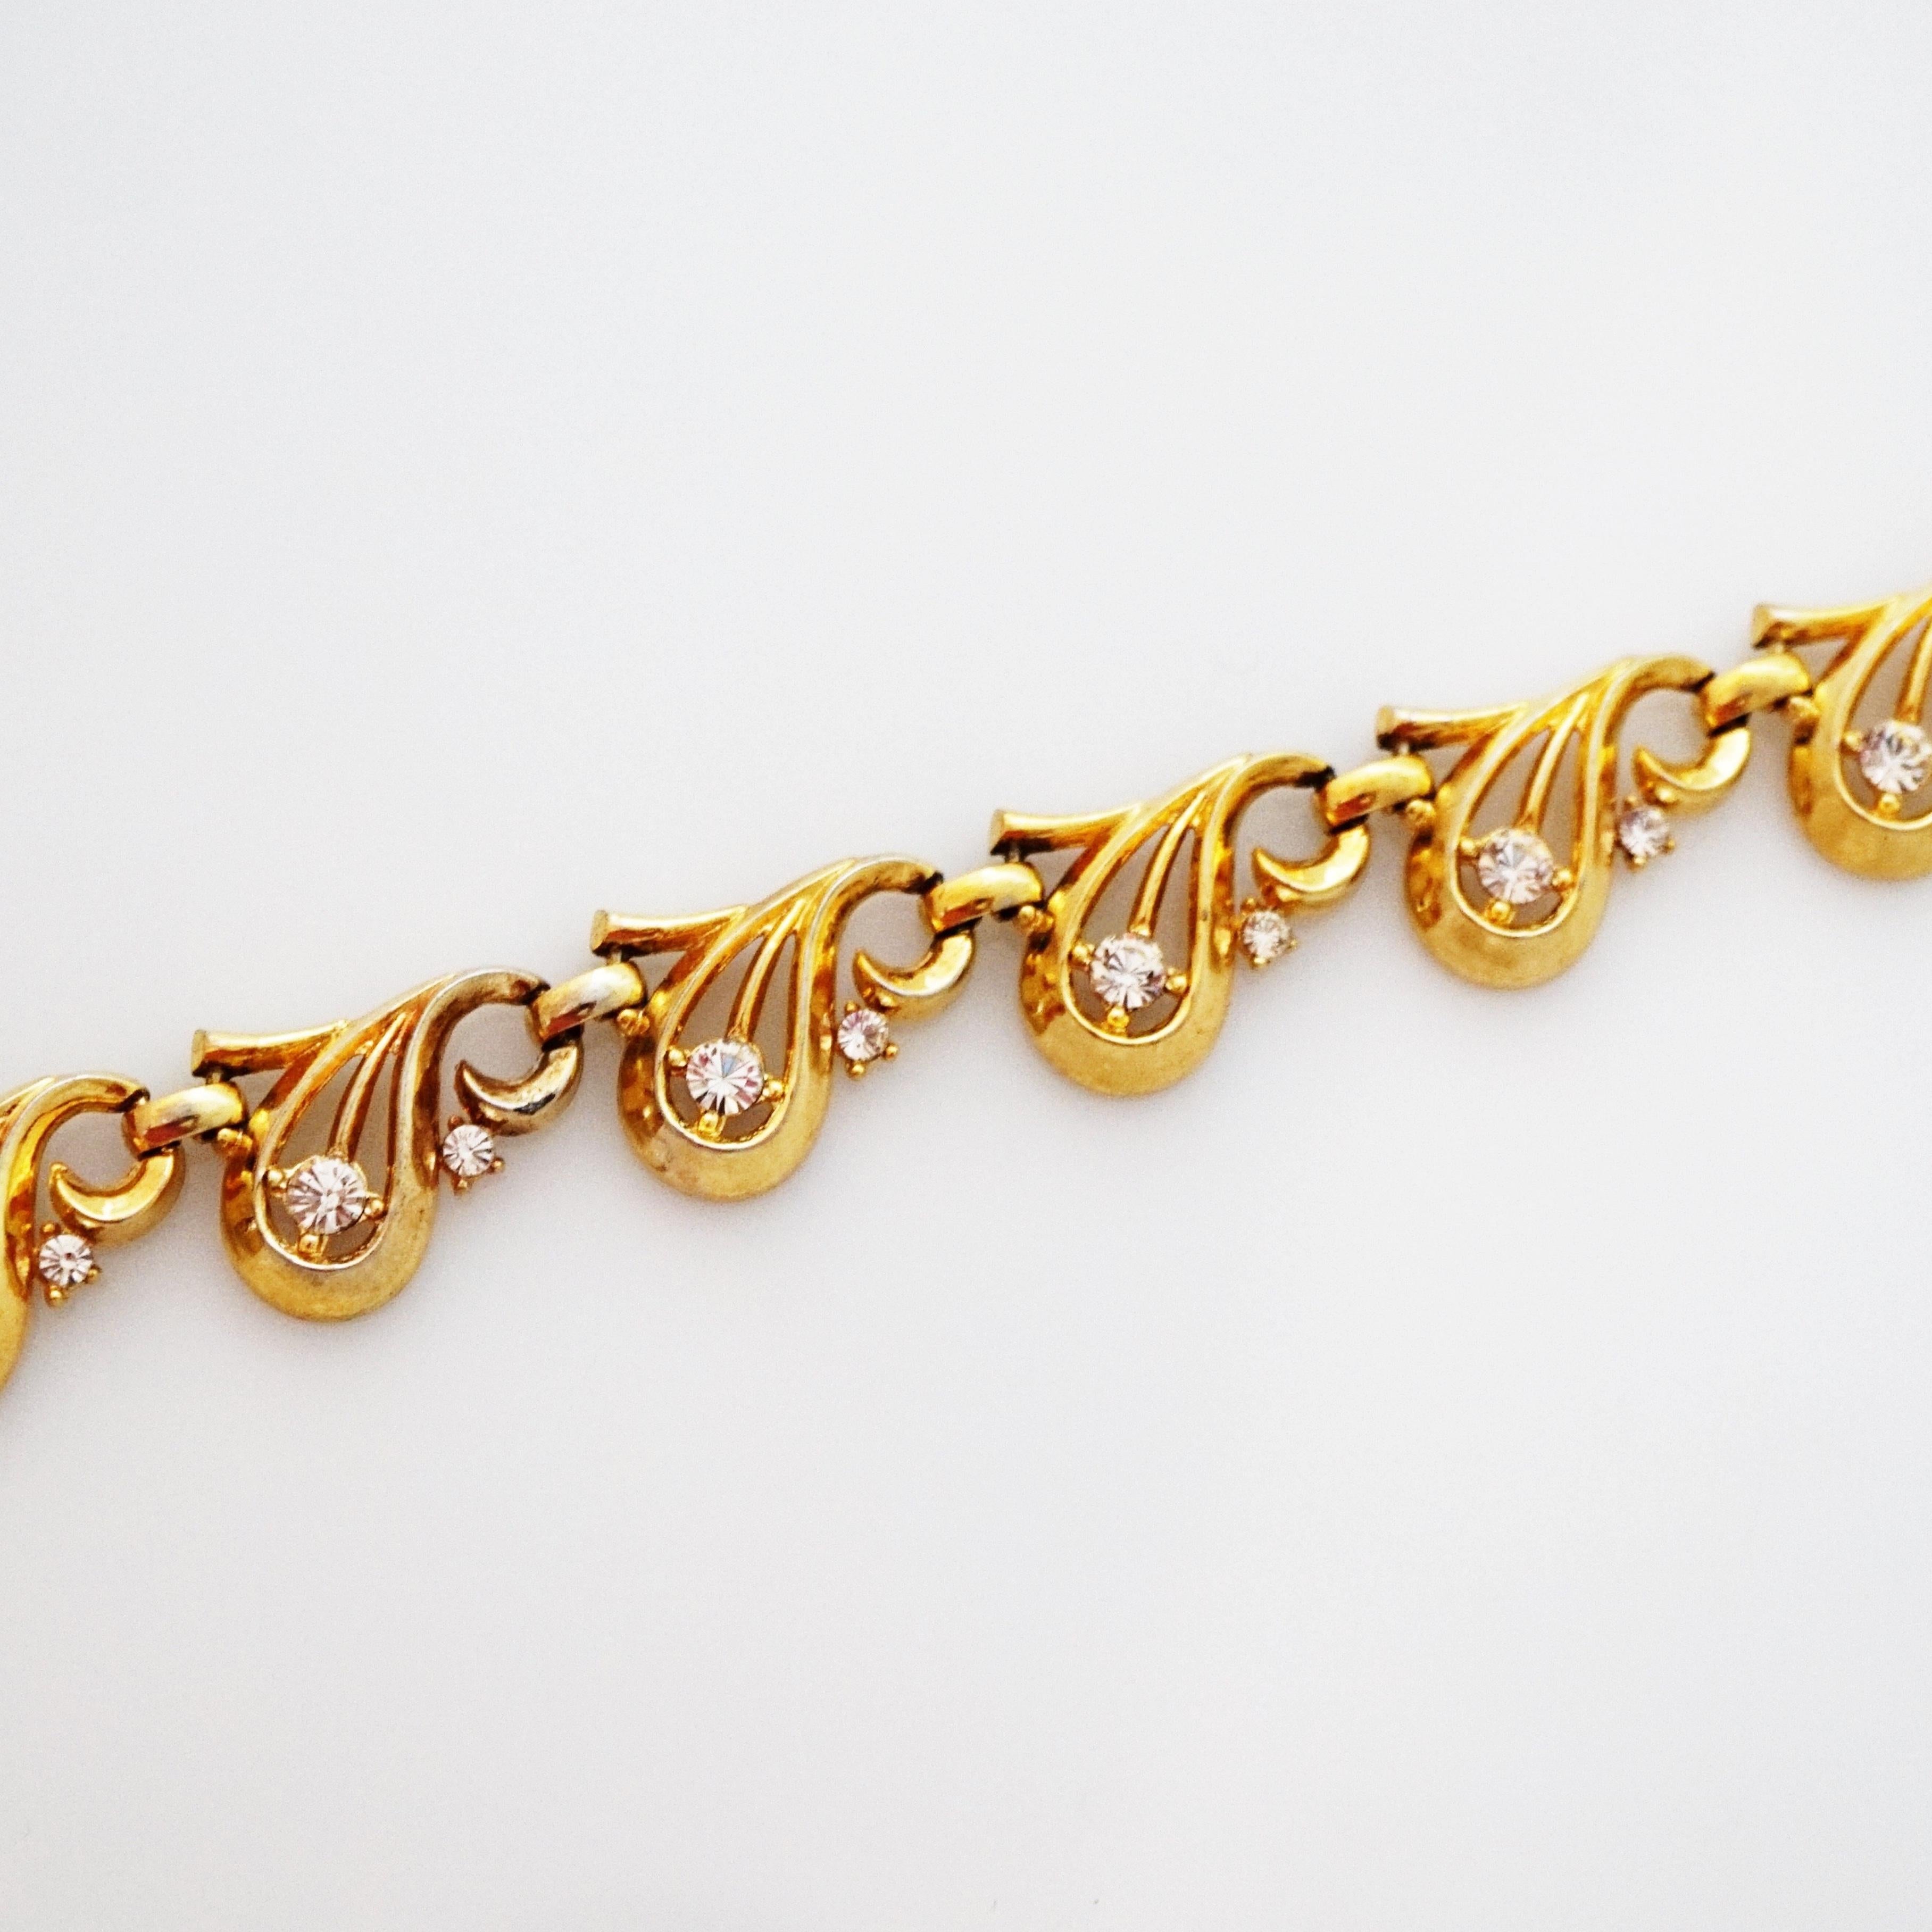 Women's 1940s Art Nouveau Teardrop Link Choker Necklace By Alfred Philippe For Trifari For Sale